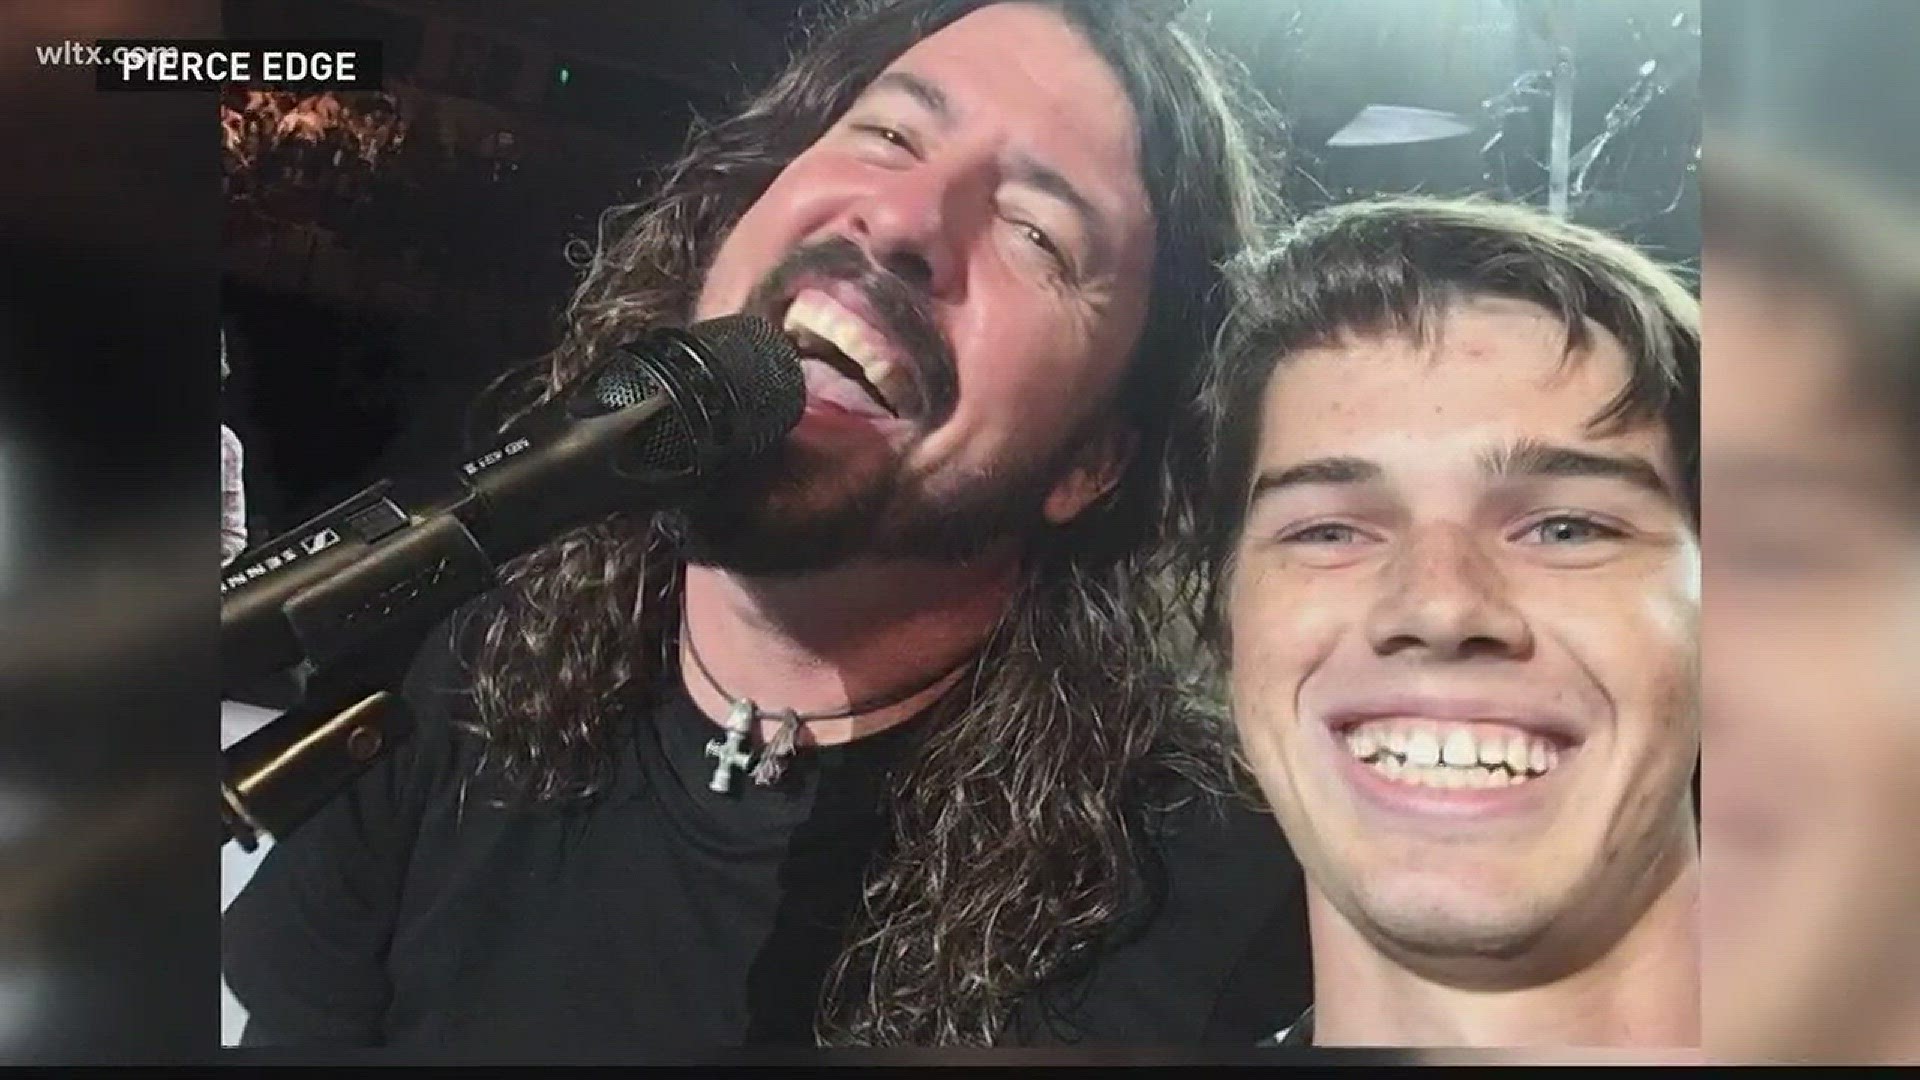 When Pierce Edge got his chance to rock with the 'Foo Fighters,' he didn't miss a beat.